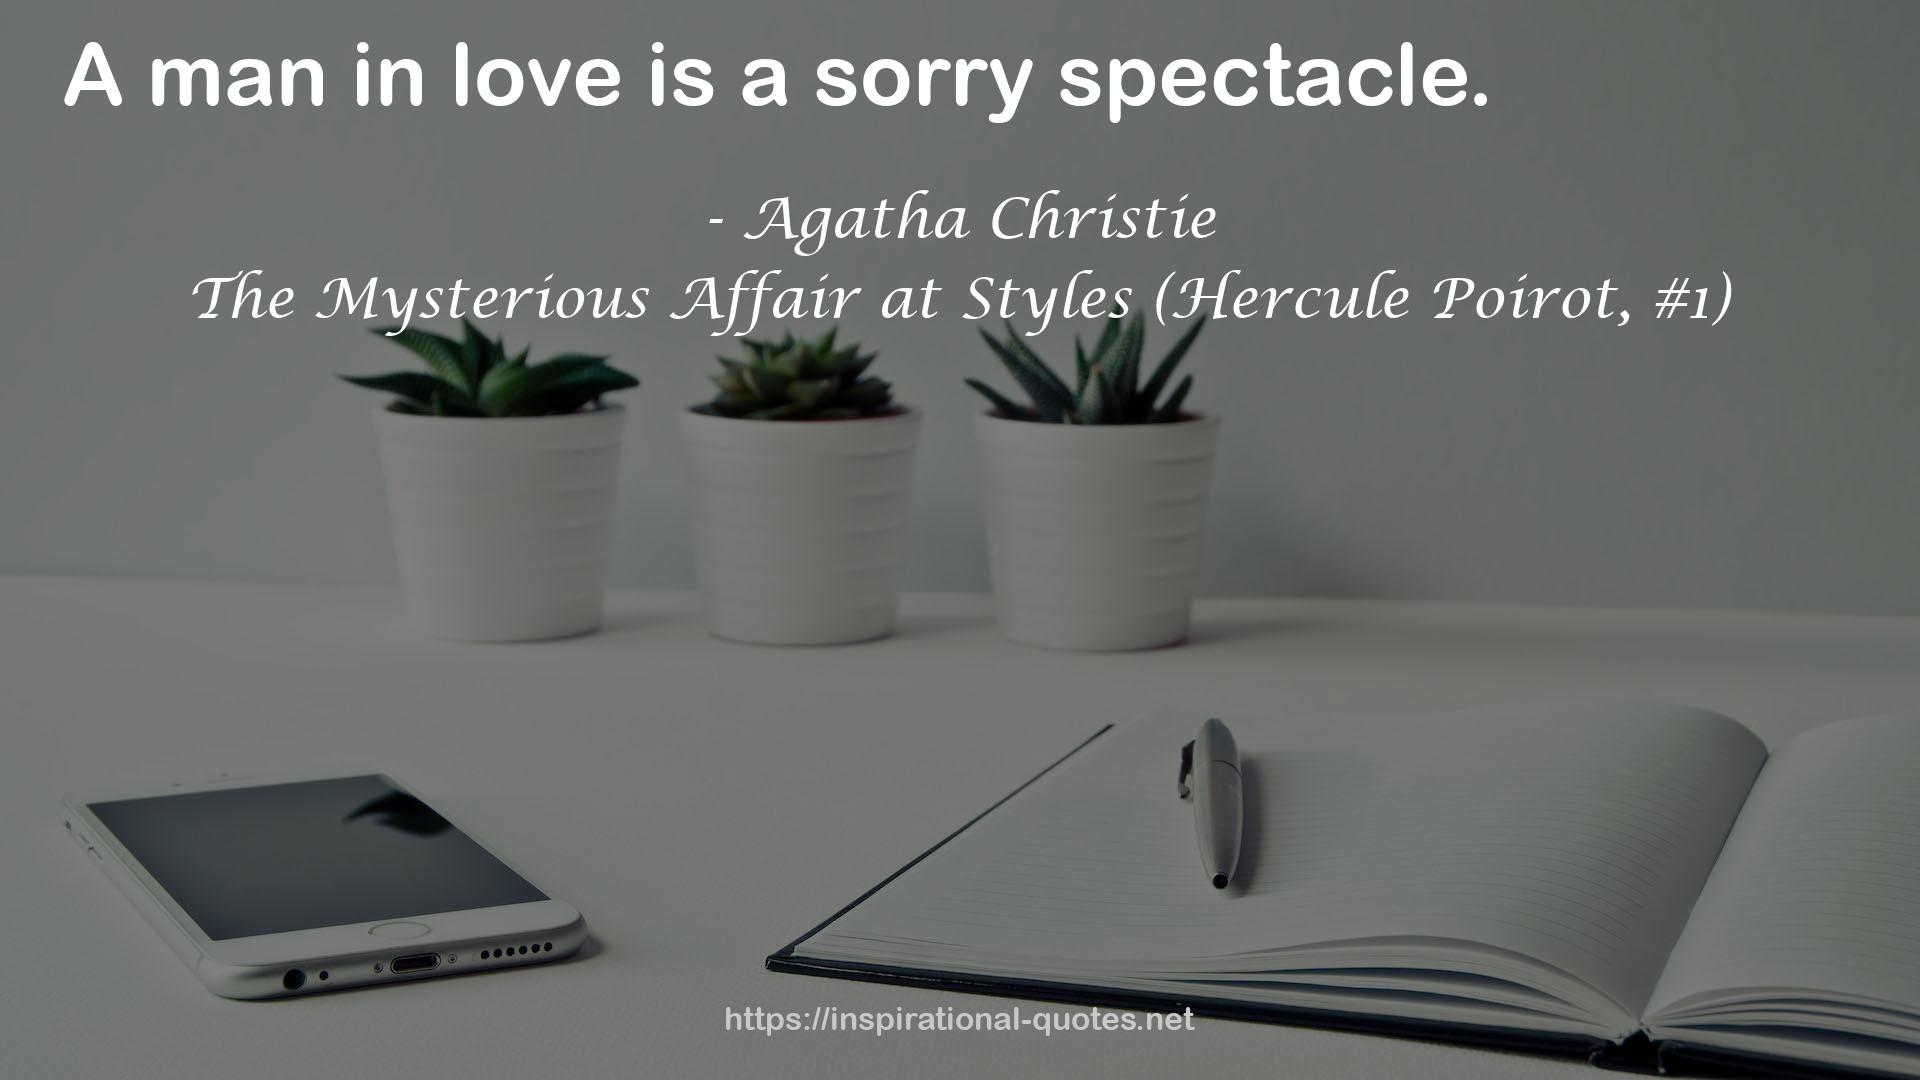 The Mysterious Affair at Styles (Hercule Poirot, #1) QUOTES